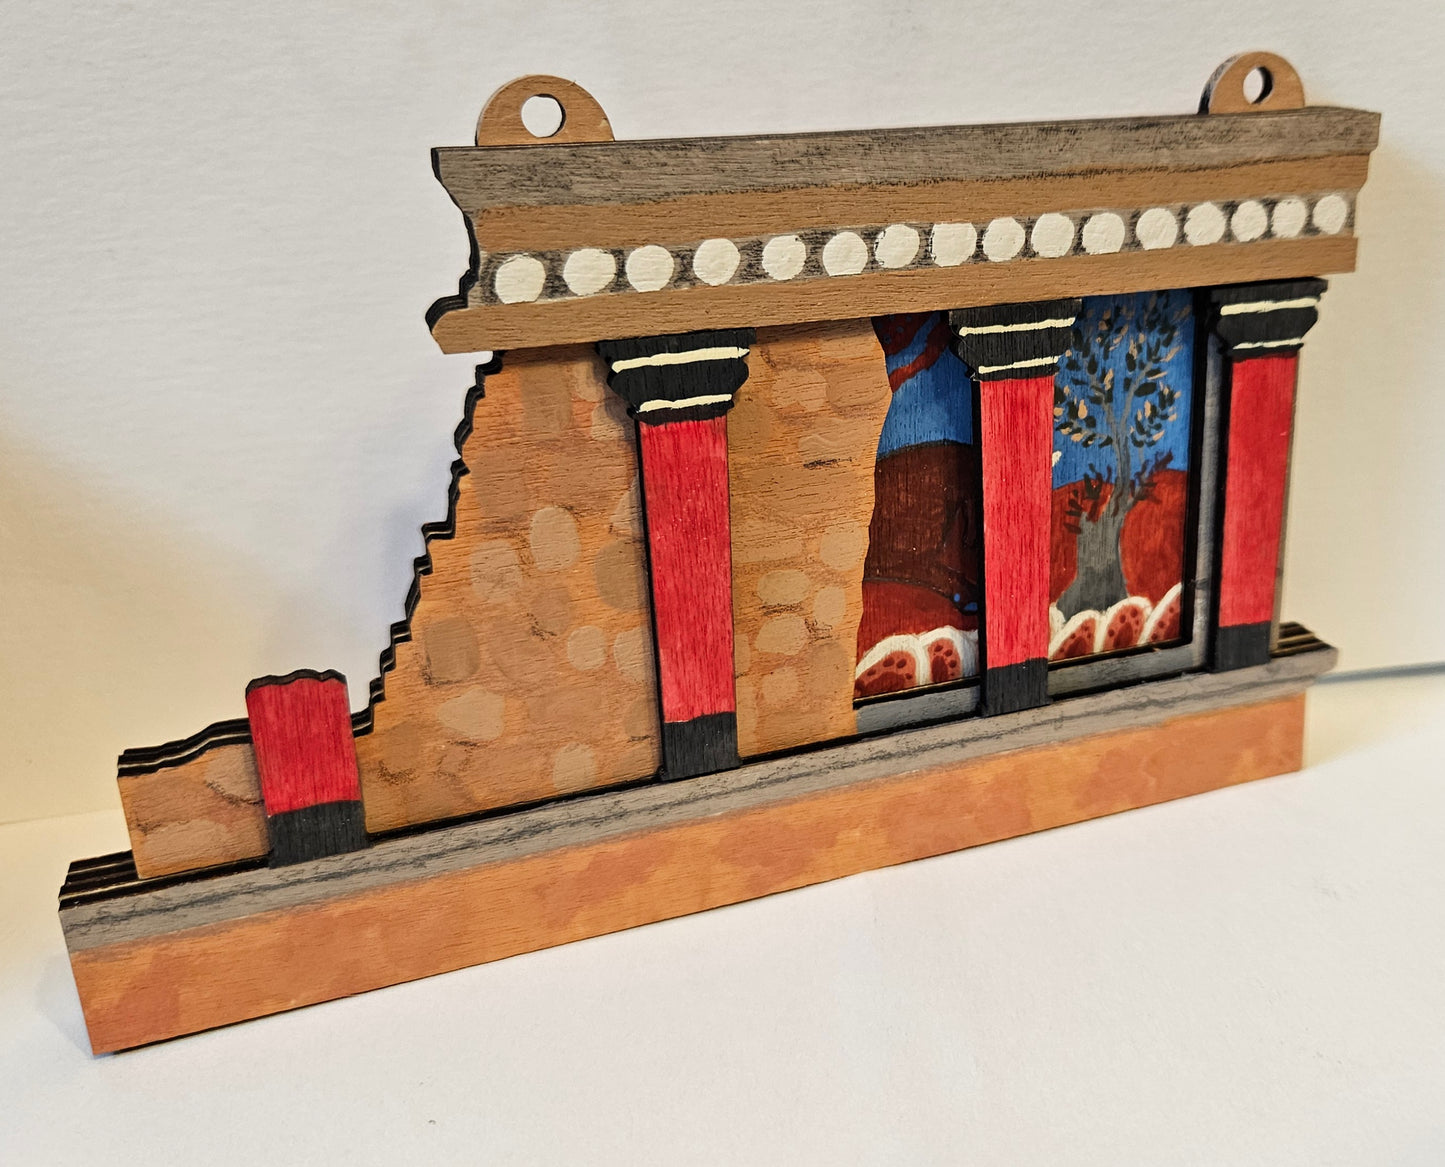 handmade recreation of a Minoan bull fresco and columns from Knossos palace on Crete in Greece